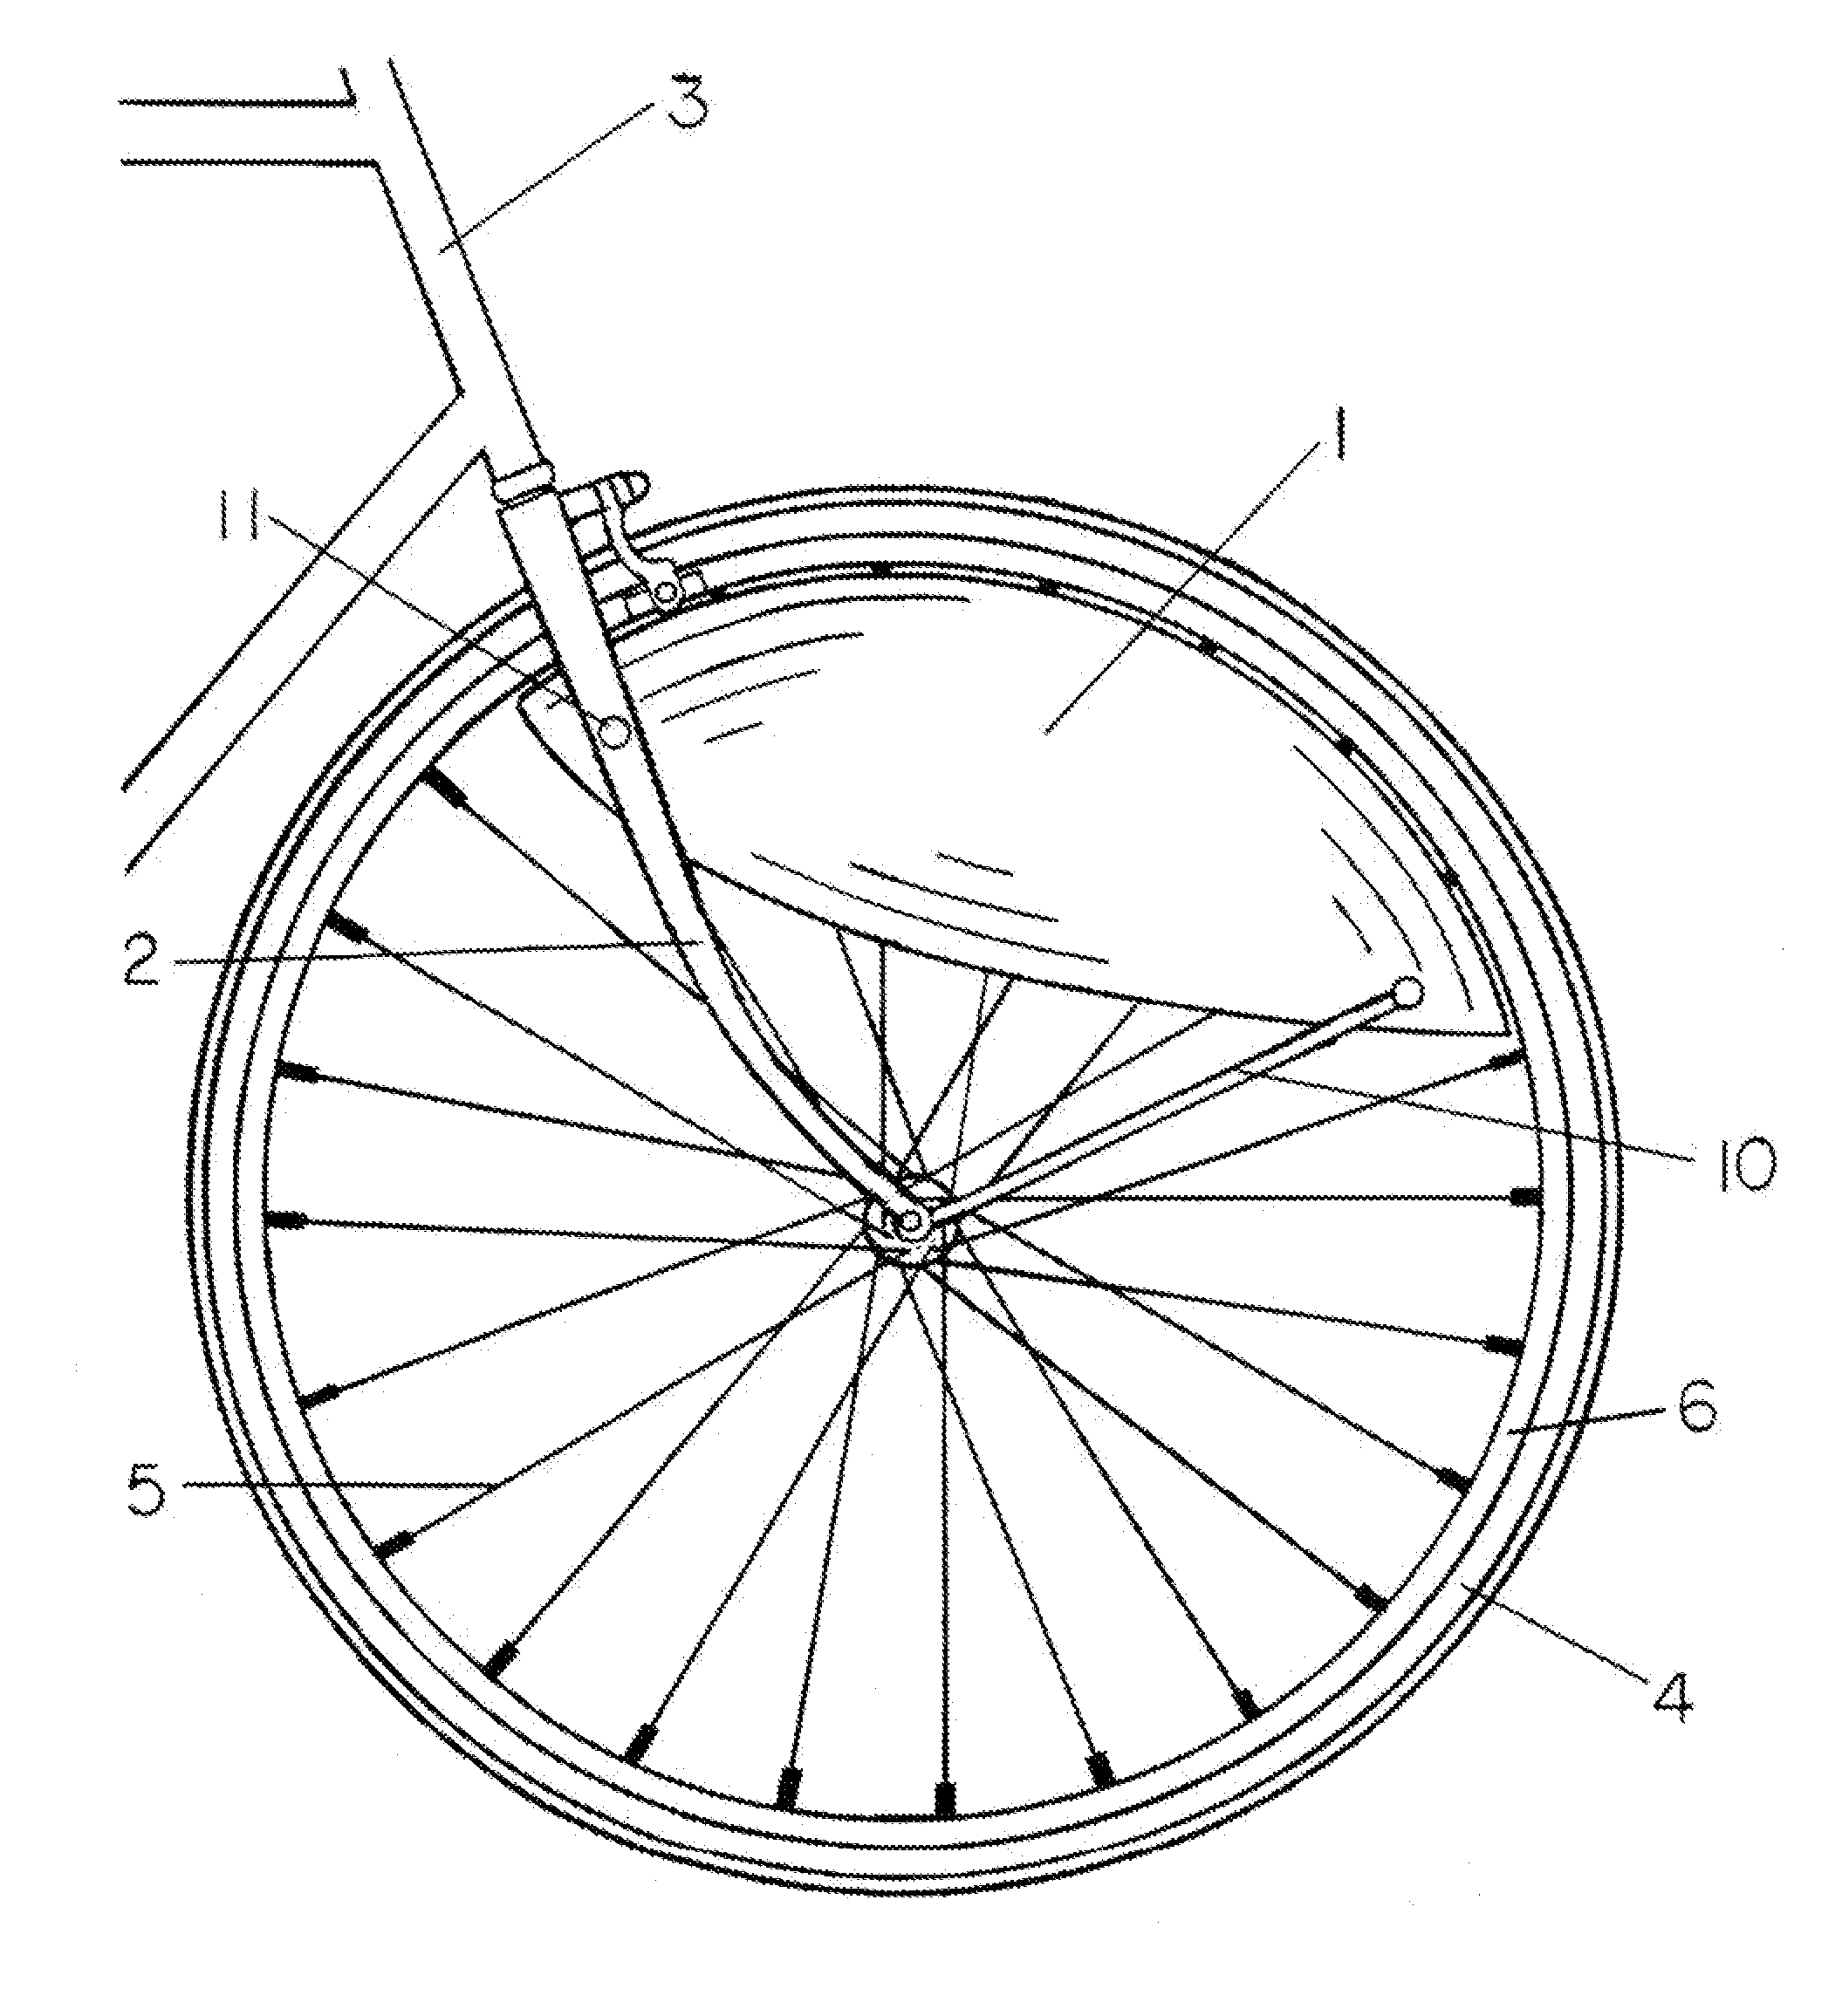 METHOD and APPARATUS for MINIMIZING DRAG-INDUCED FORCES on a WHEELED VEHICLE